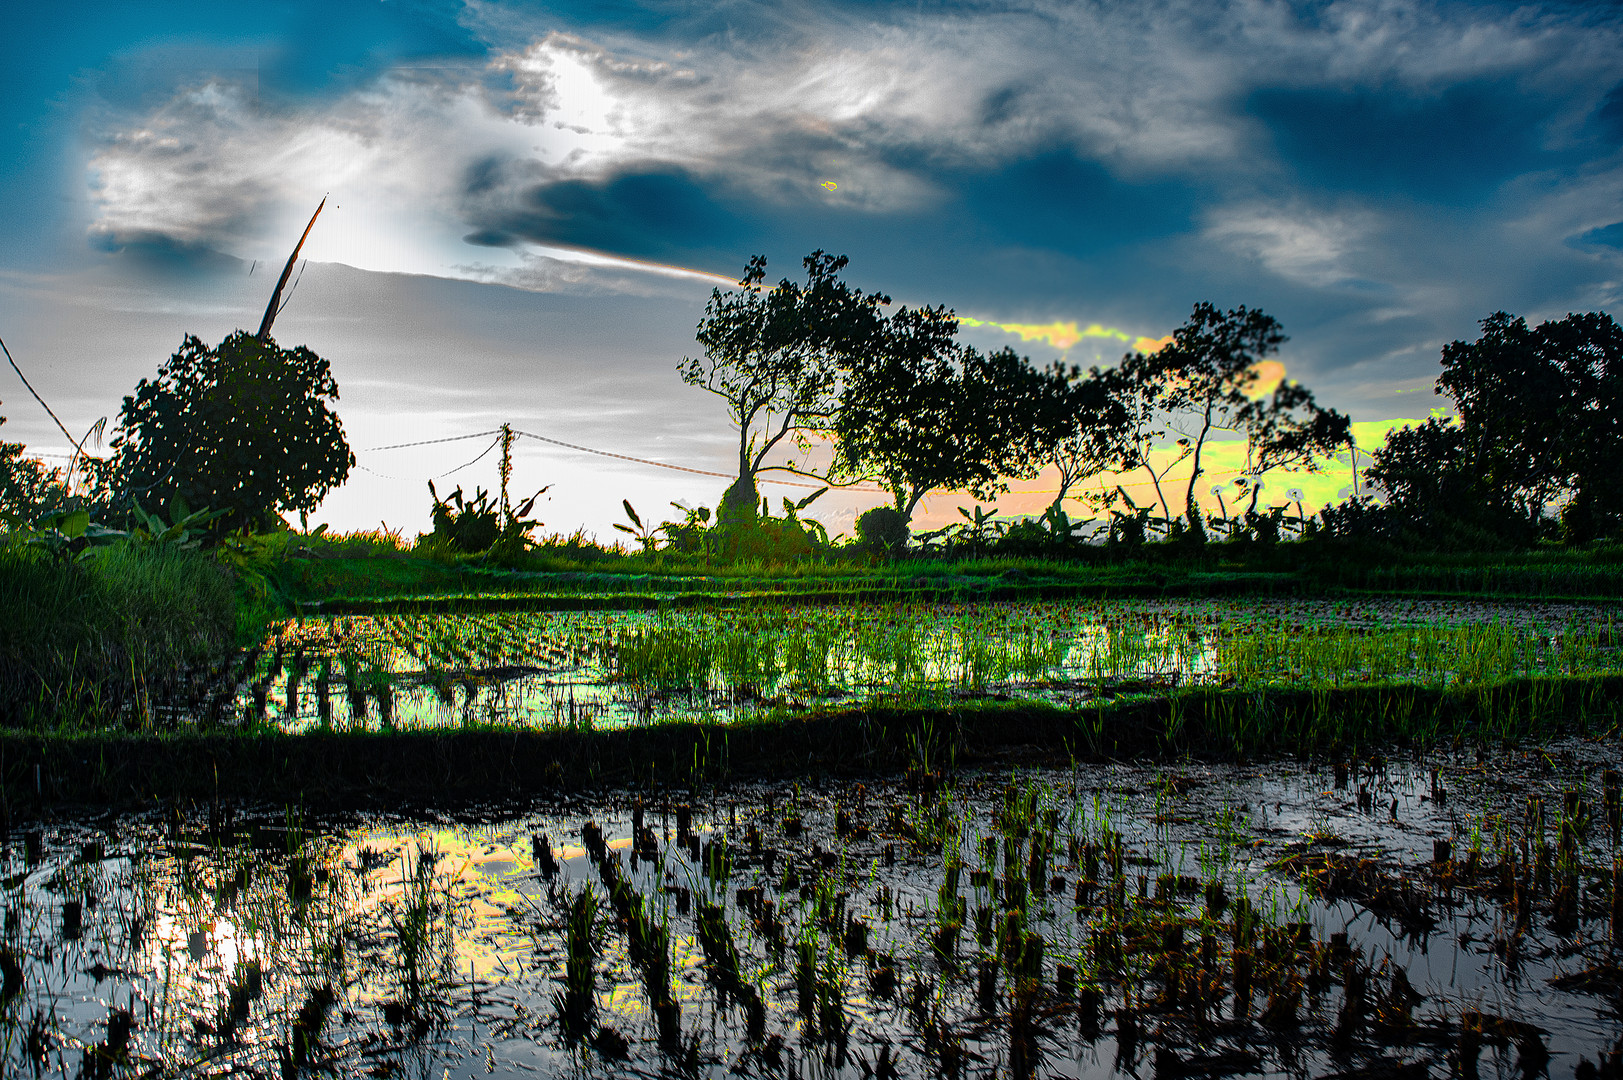 Ricefields in the sunset light